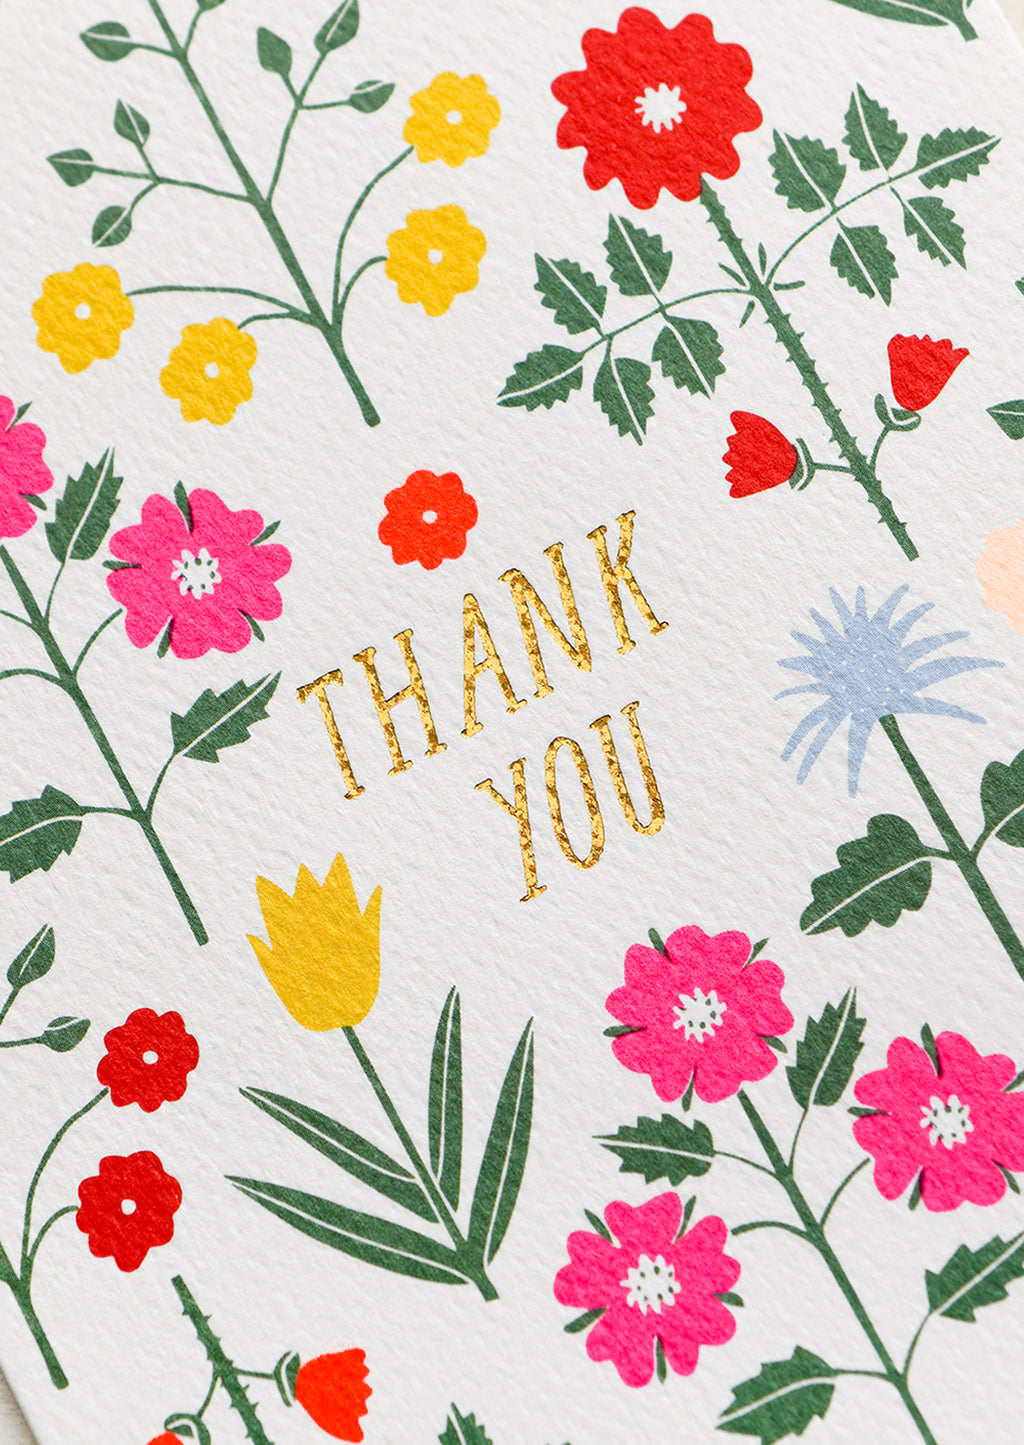 2: A set of thank you cards with vibrant floral pattern and gold "Thank You" text at center.